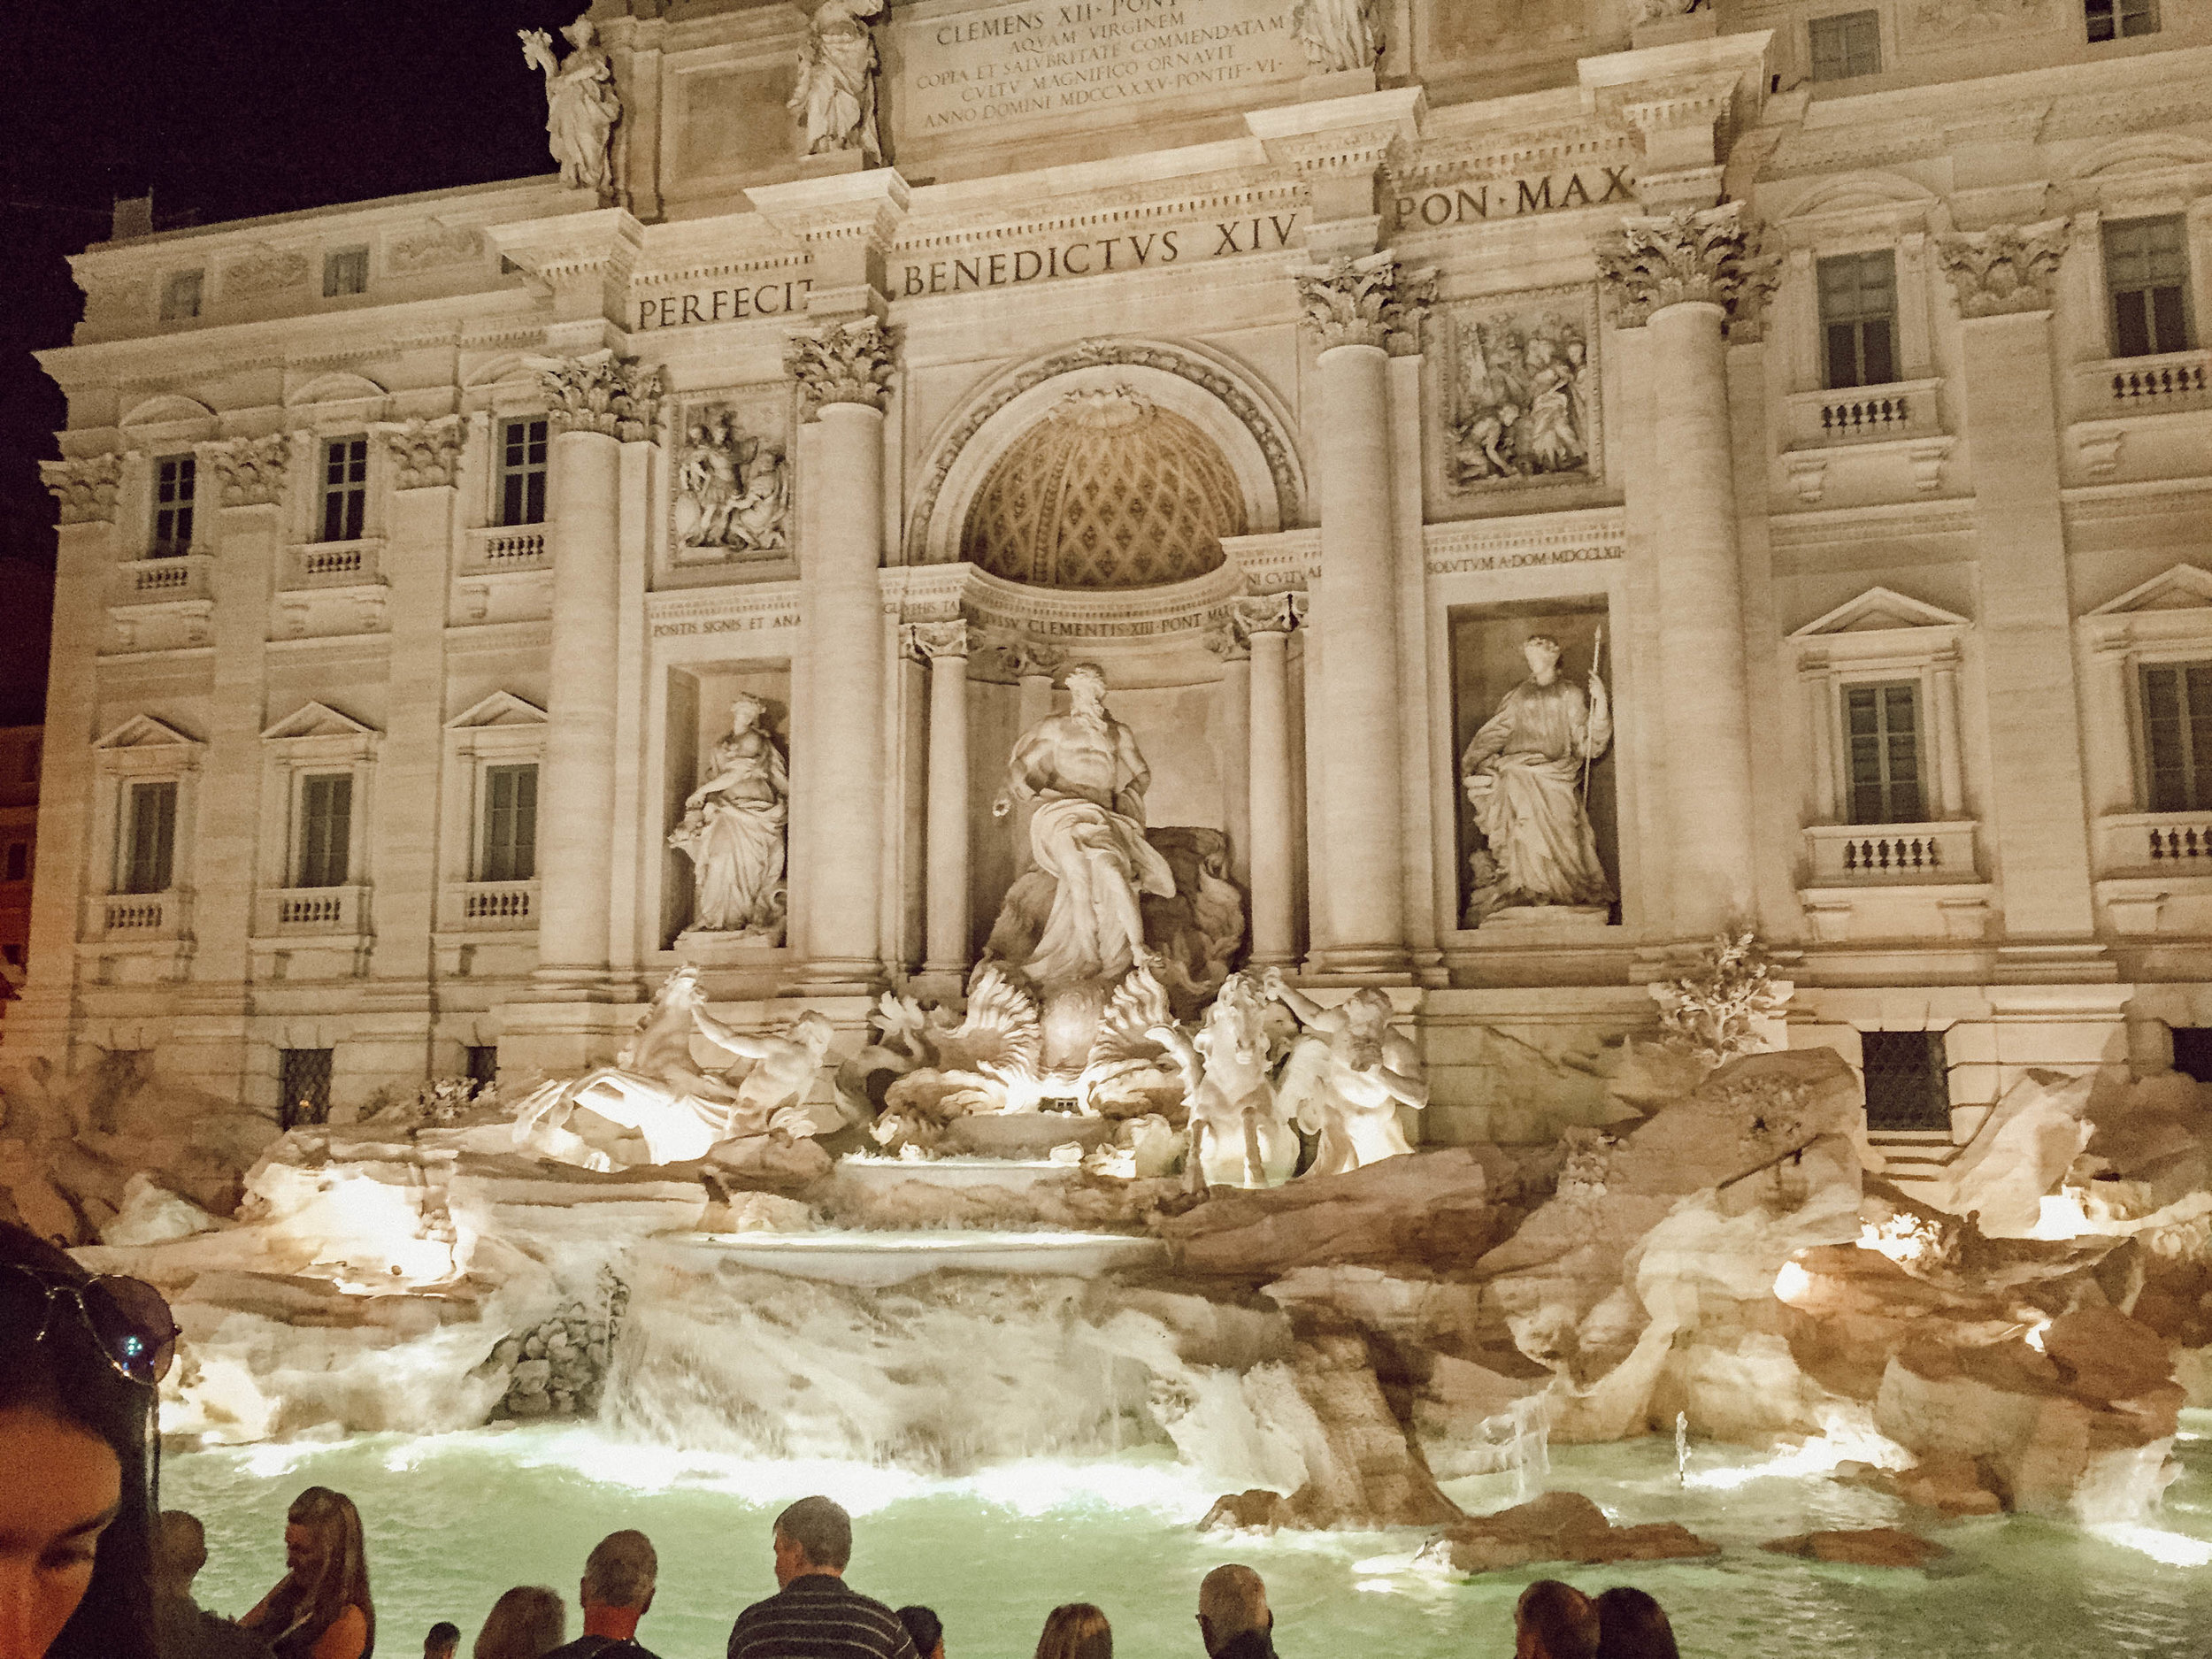 The Trevi at night